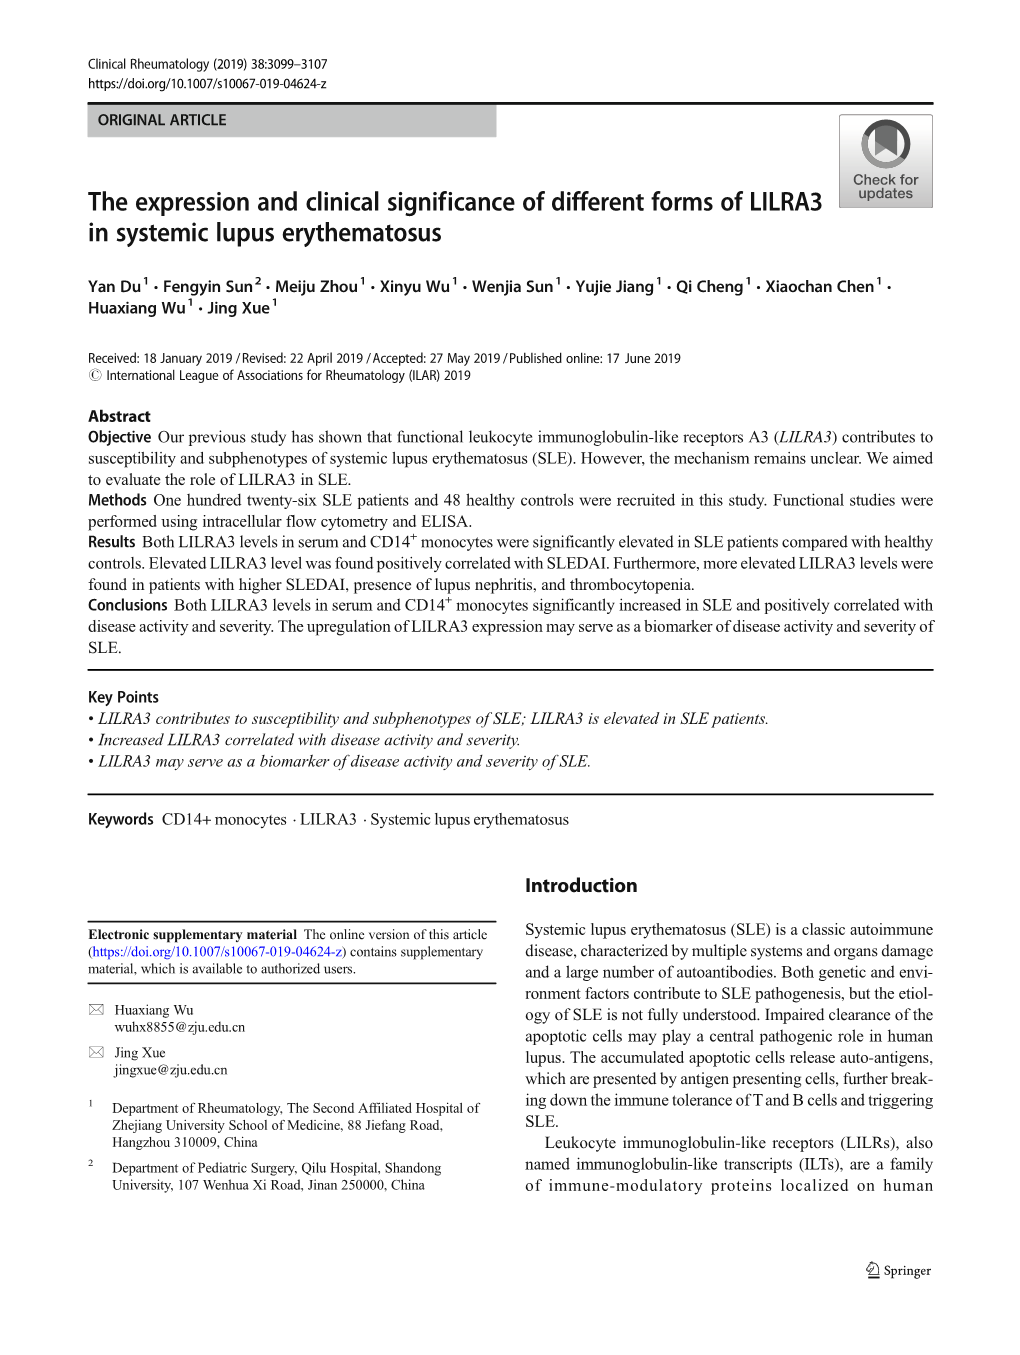 The Expression and Clinical Significance of Different Forms of LILRA3 in Systemic Lupus Erythematosus